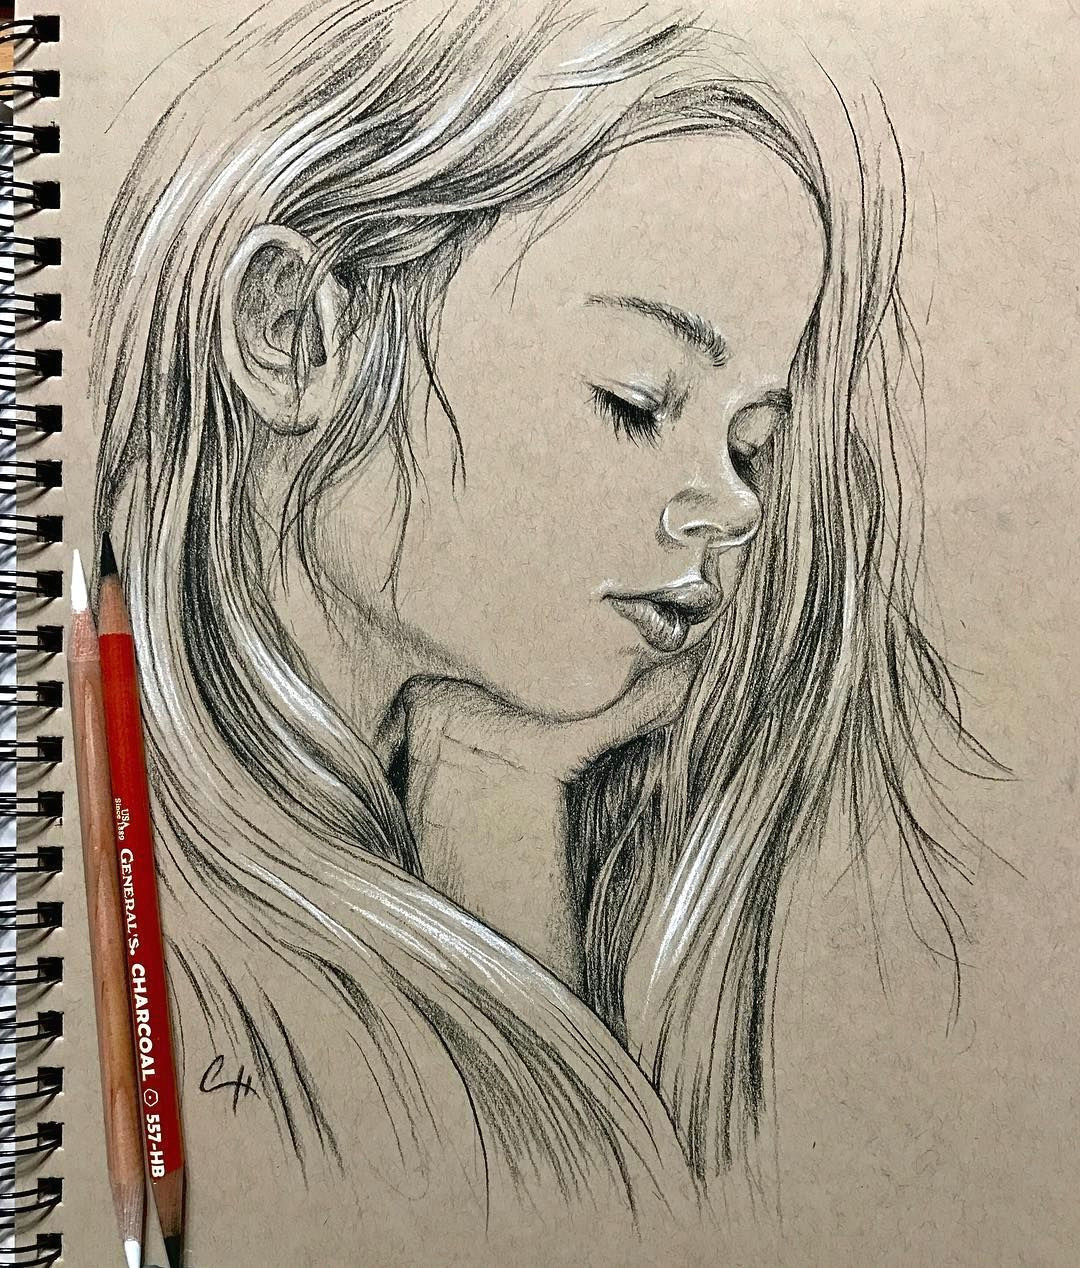 Sleeping Girl Drawing From the Slowtime Live Session This evening Girl